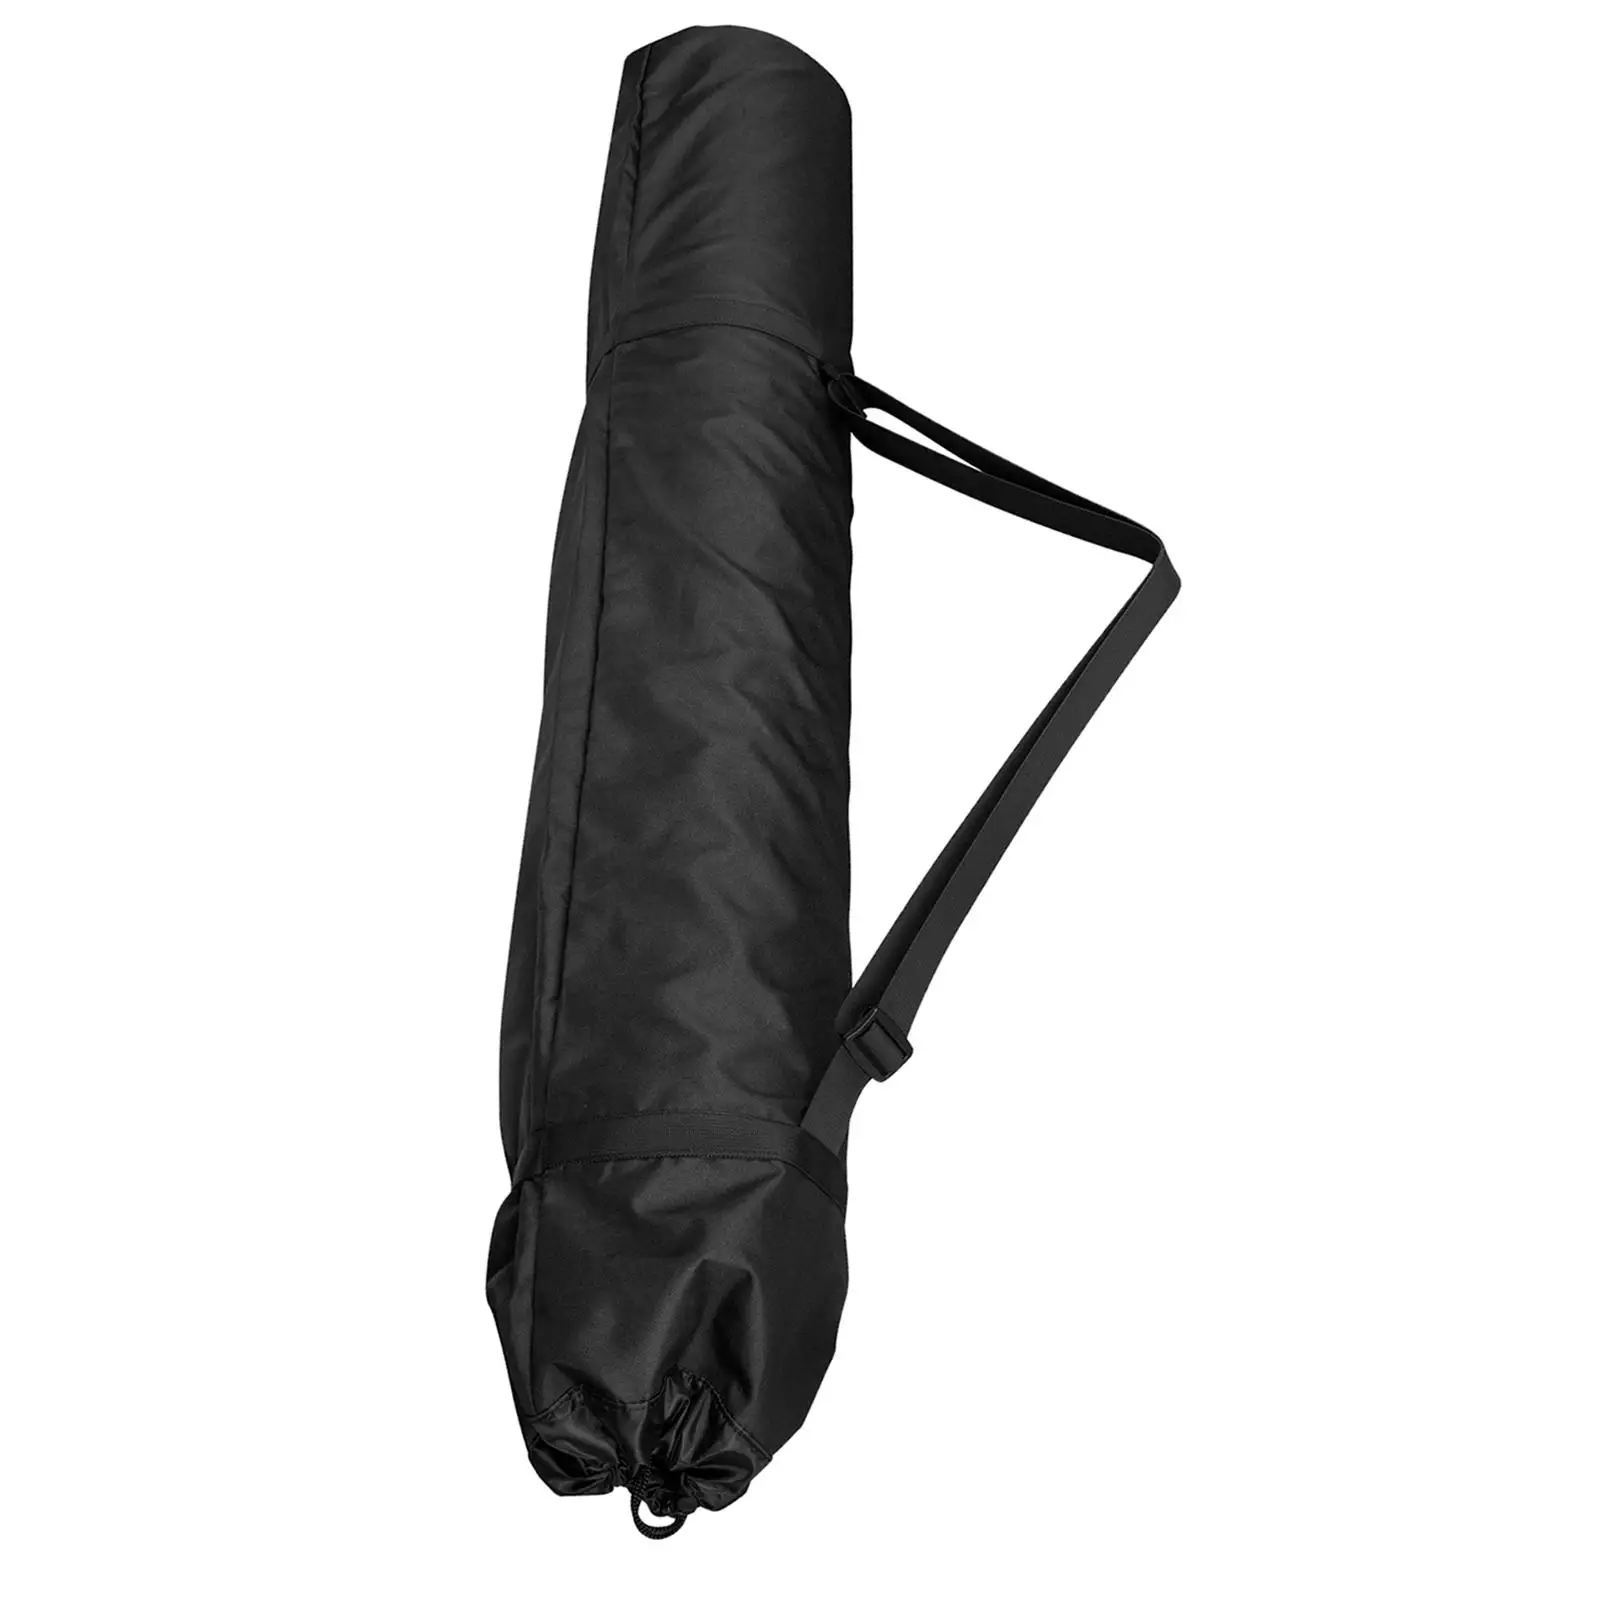 Replacement Bag Folding Chair Large Mouth Bag Lightweight Heavy Duty with Shoulder Straps Beach Outdoor Carry Bag for Lawn Patio